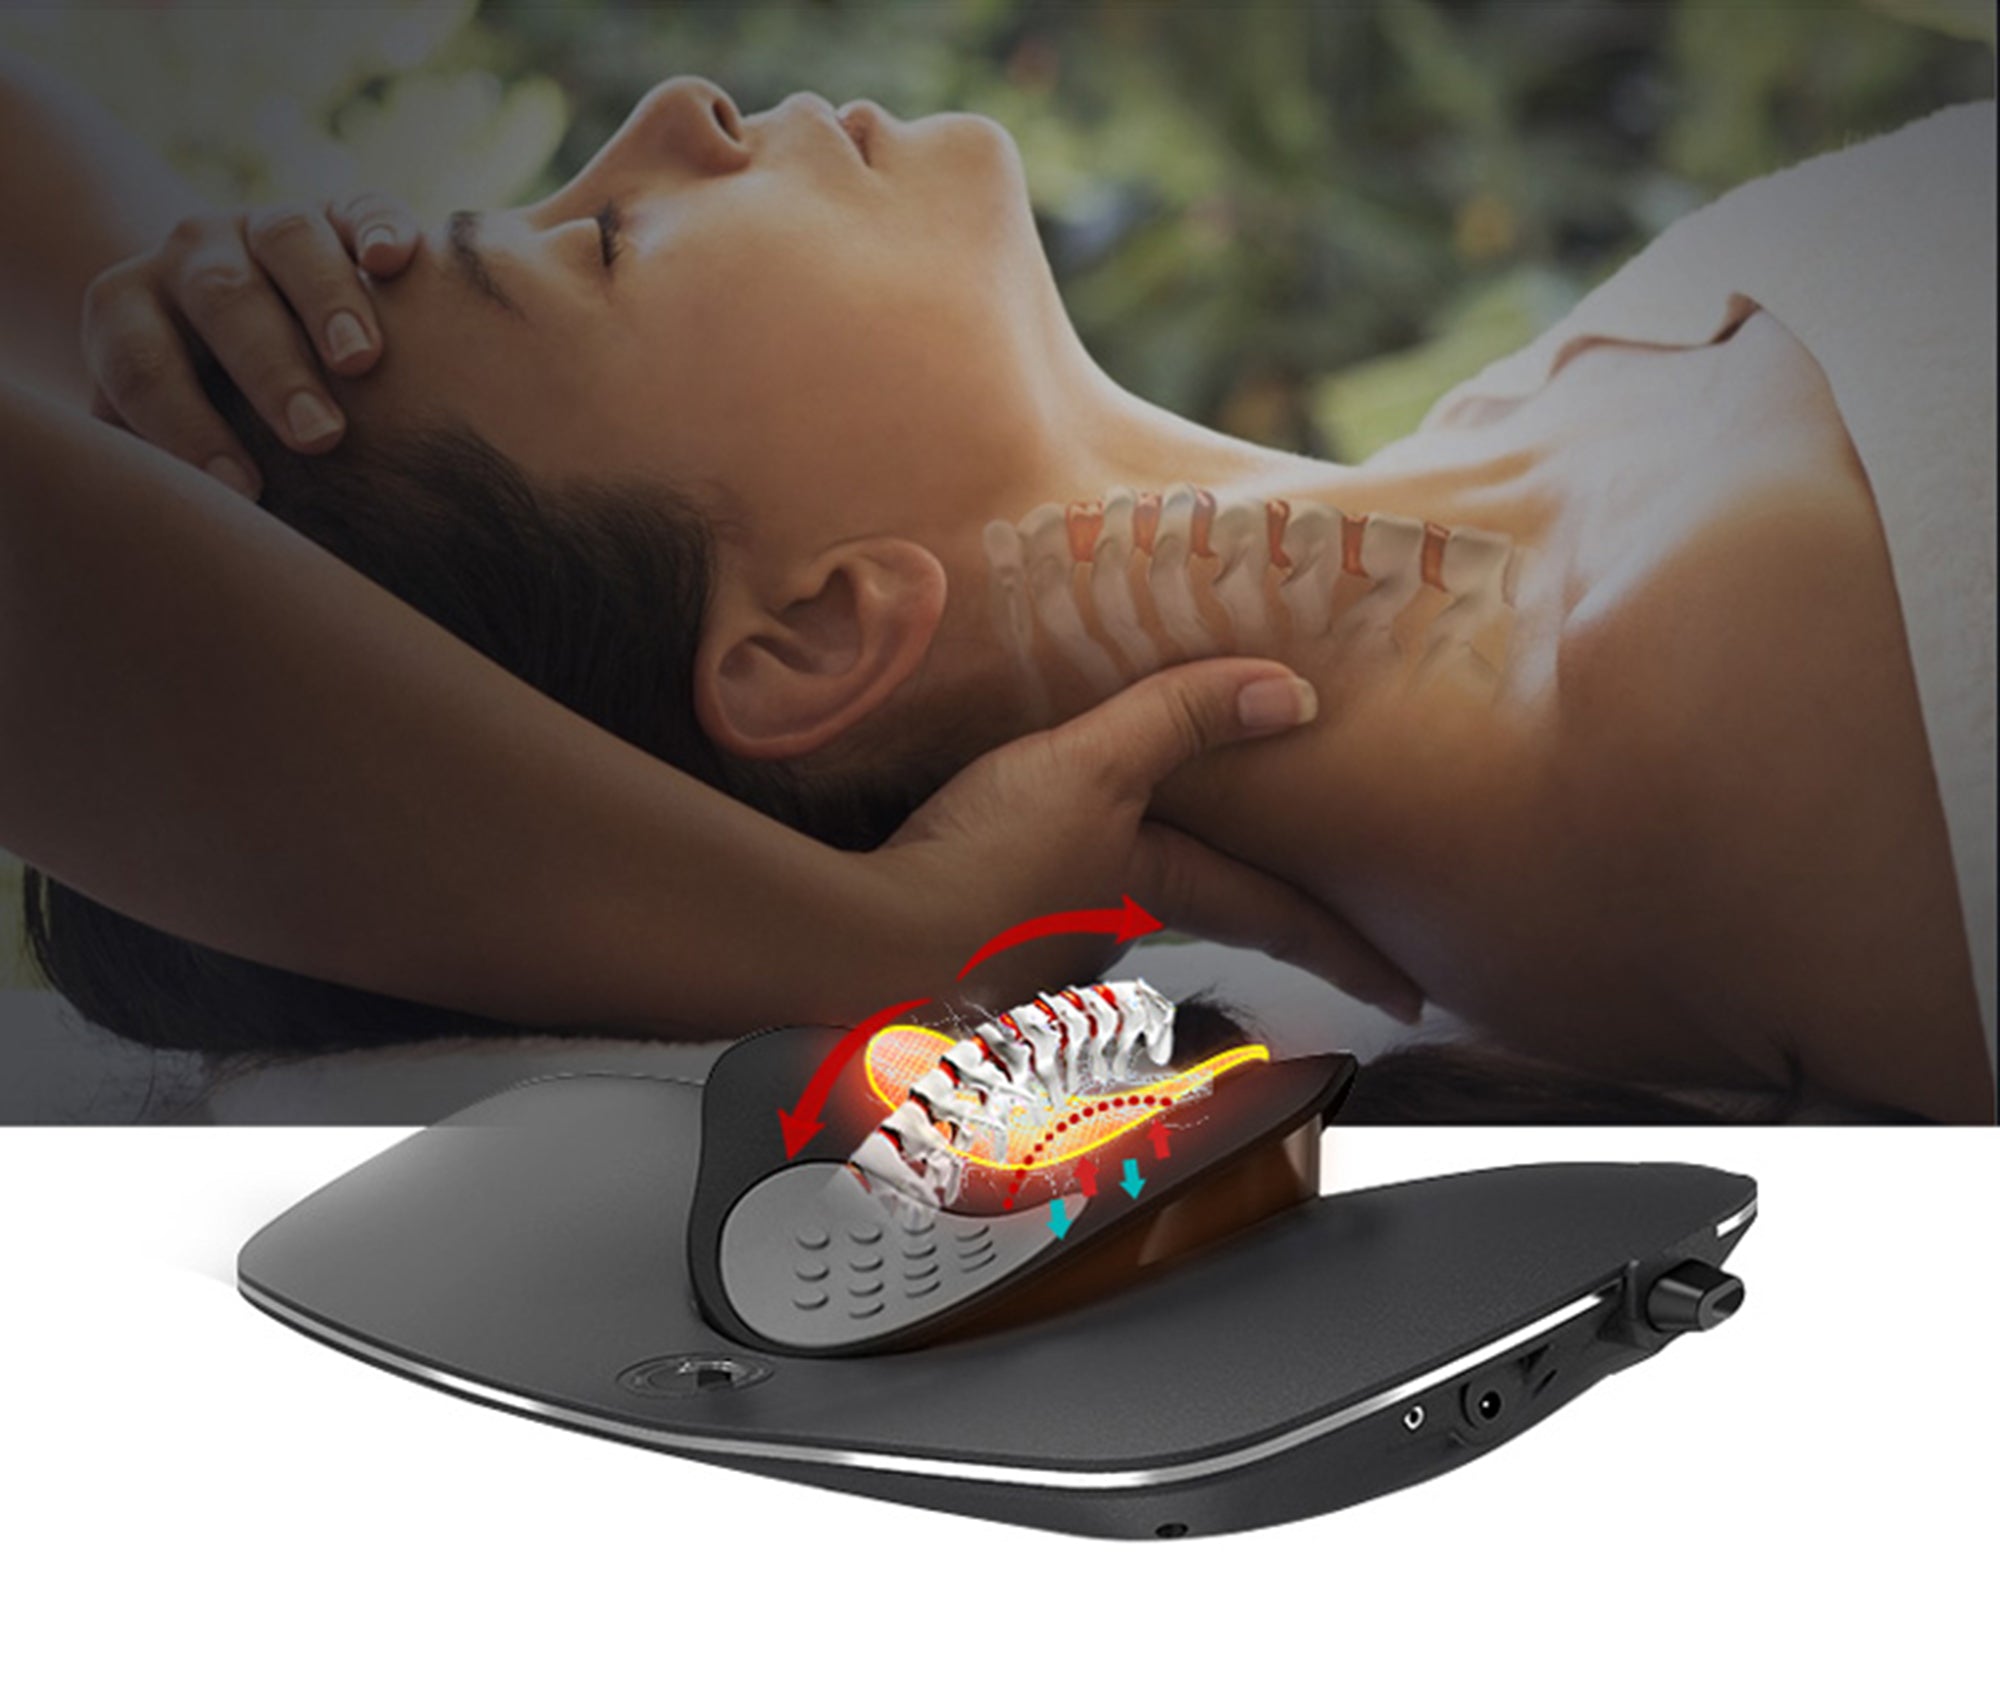 Relieve neck and back pain, Best neck traction device Neck traction heat electronic pulse technology Headaches fatigue improve posture Relieve neck and upper back tension  Relax and soothe the neck and upper back muscles prevent and correct poor posture